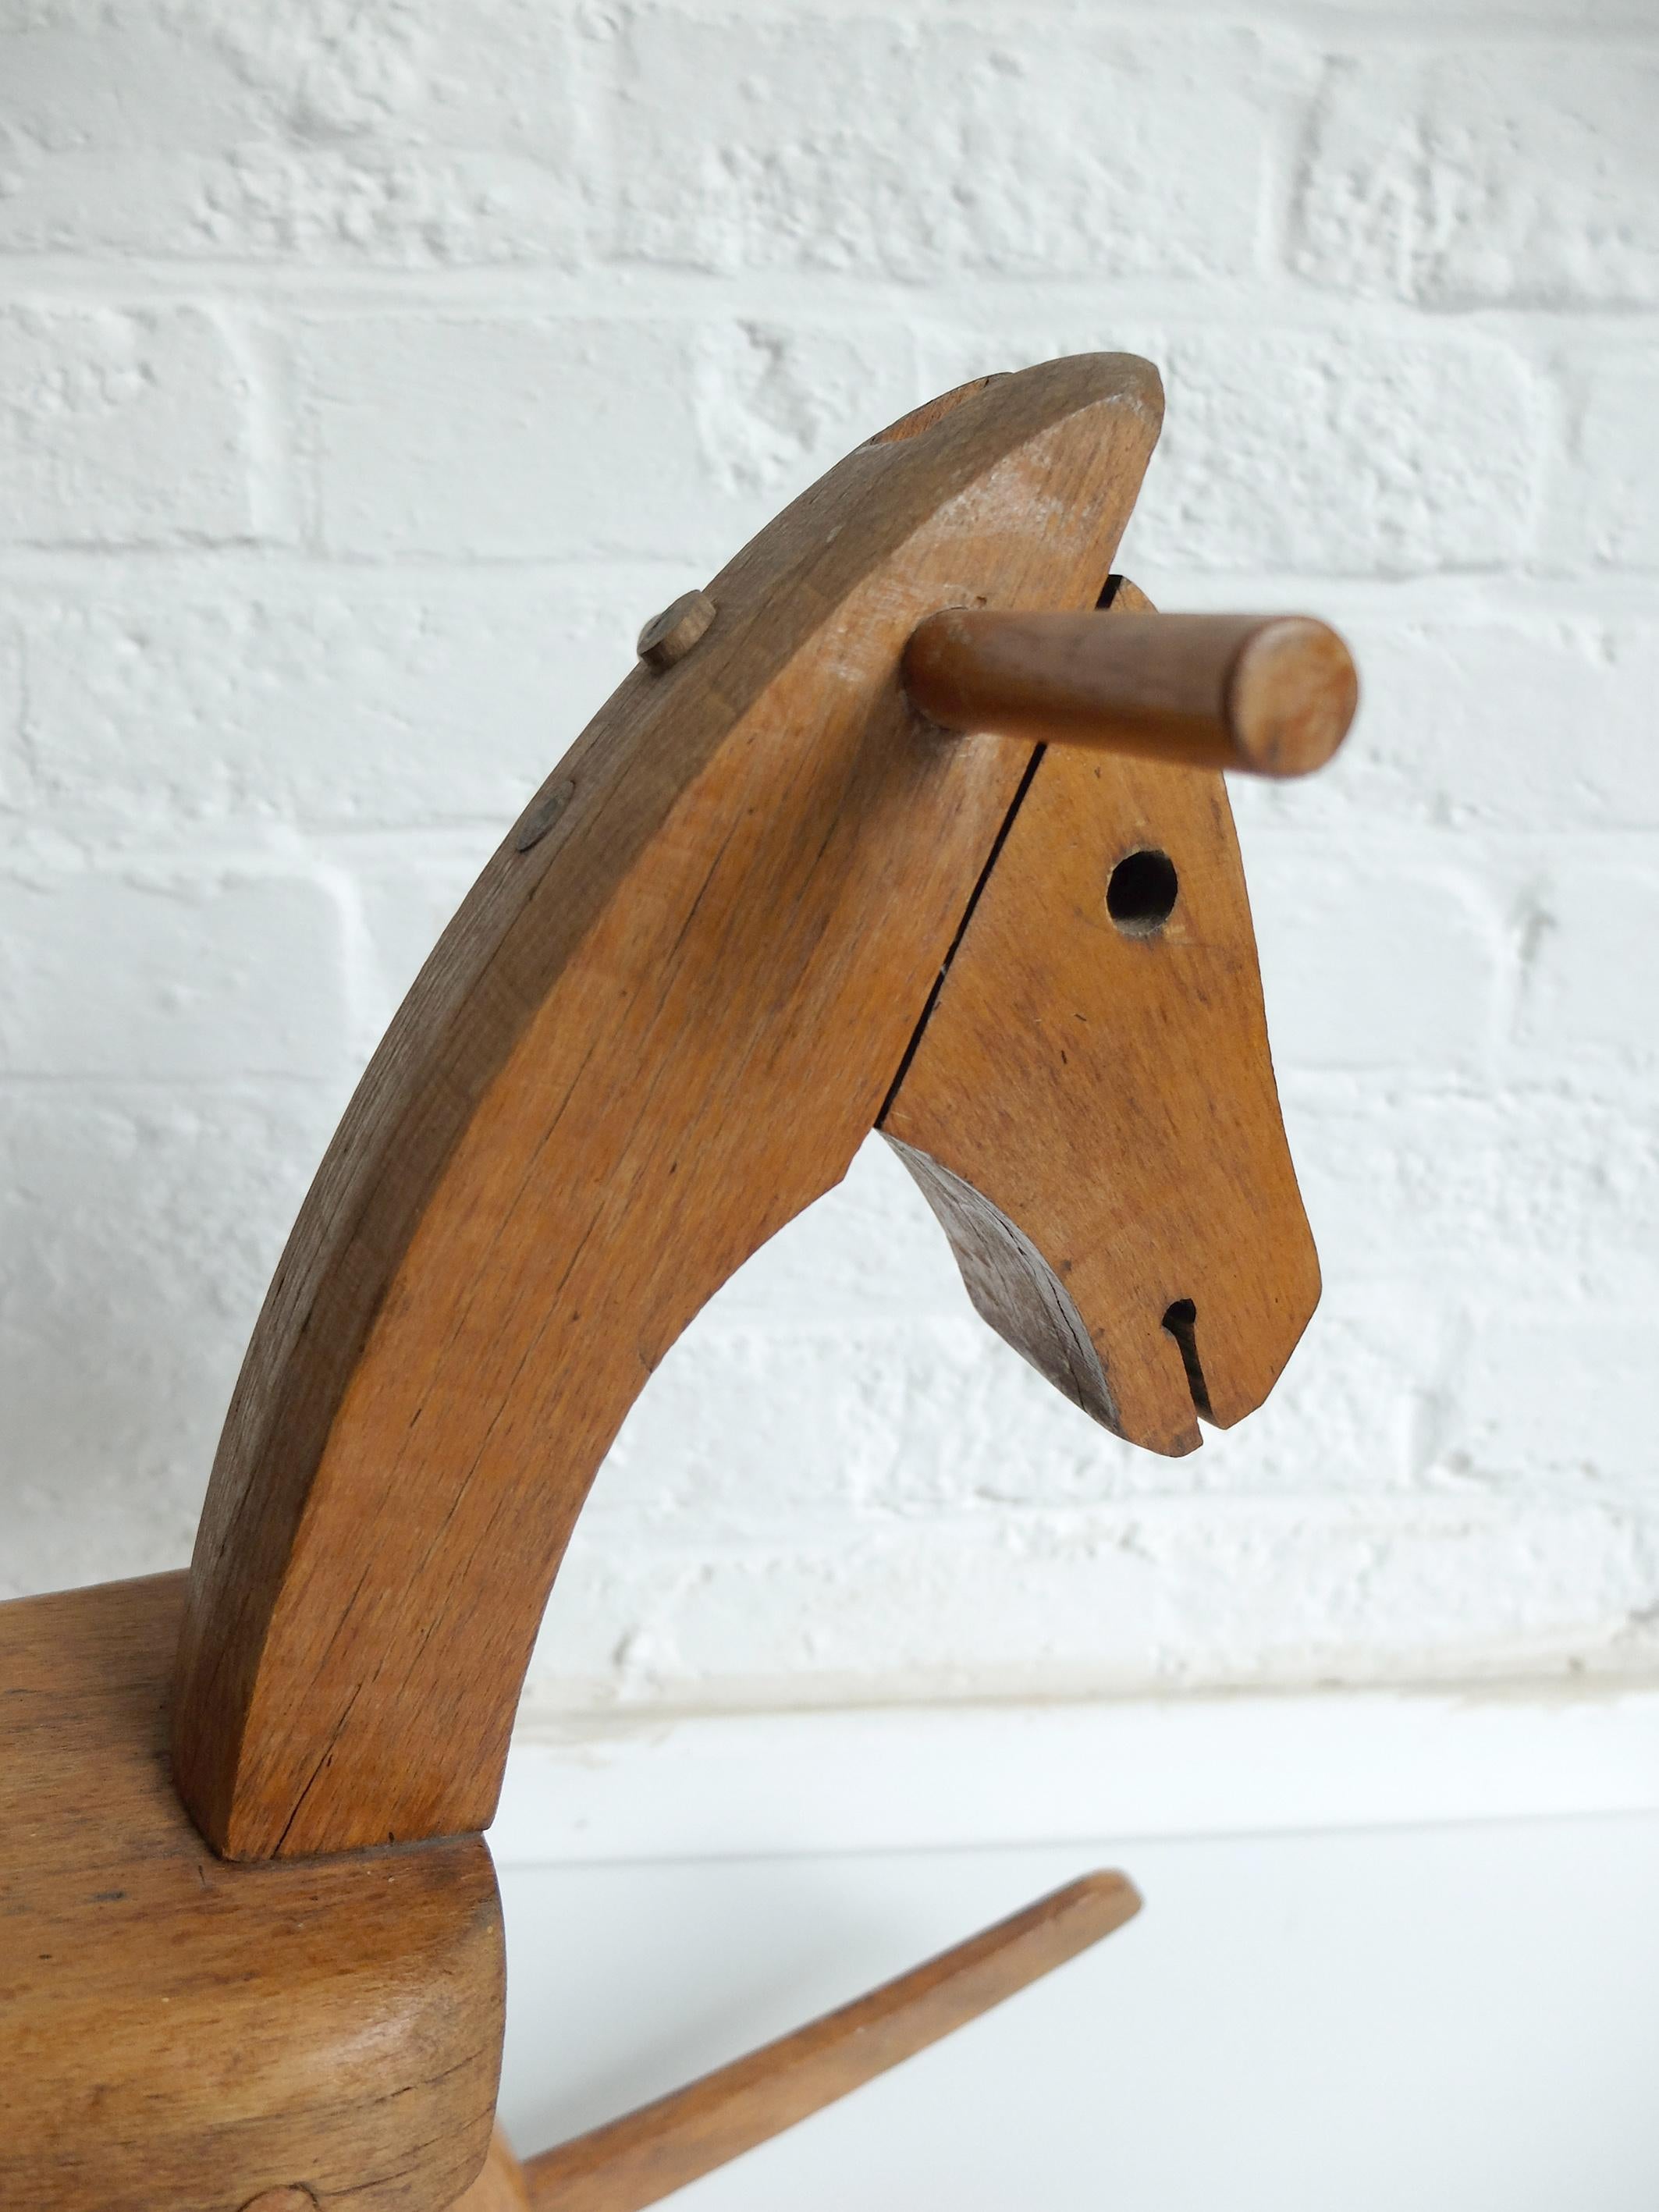 Scandinavian children's rocking horse designed by Kay Bojesen in 1936. 
The design is appealing not only to children. 

Made from massive wood beech. The lines and joinery testify of great craftsmanship. Vintage edition probably from the 1950s or